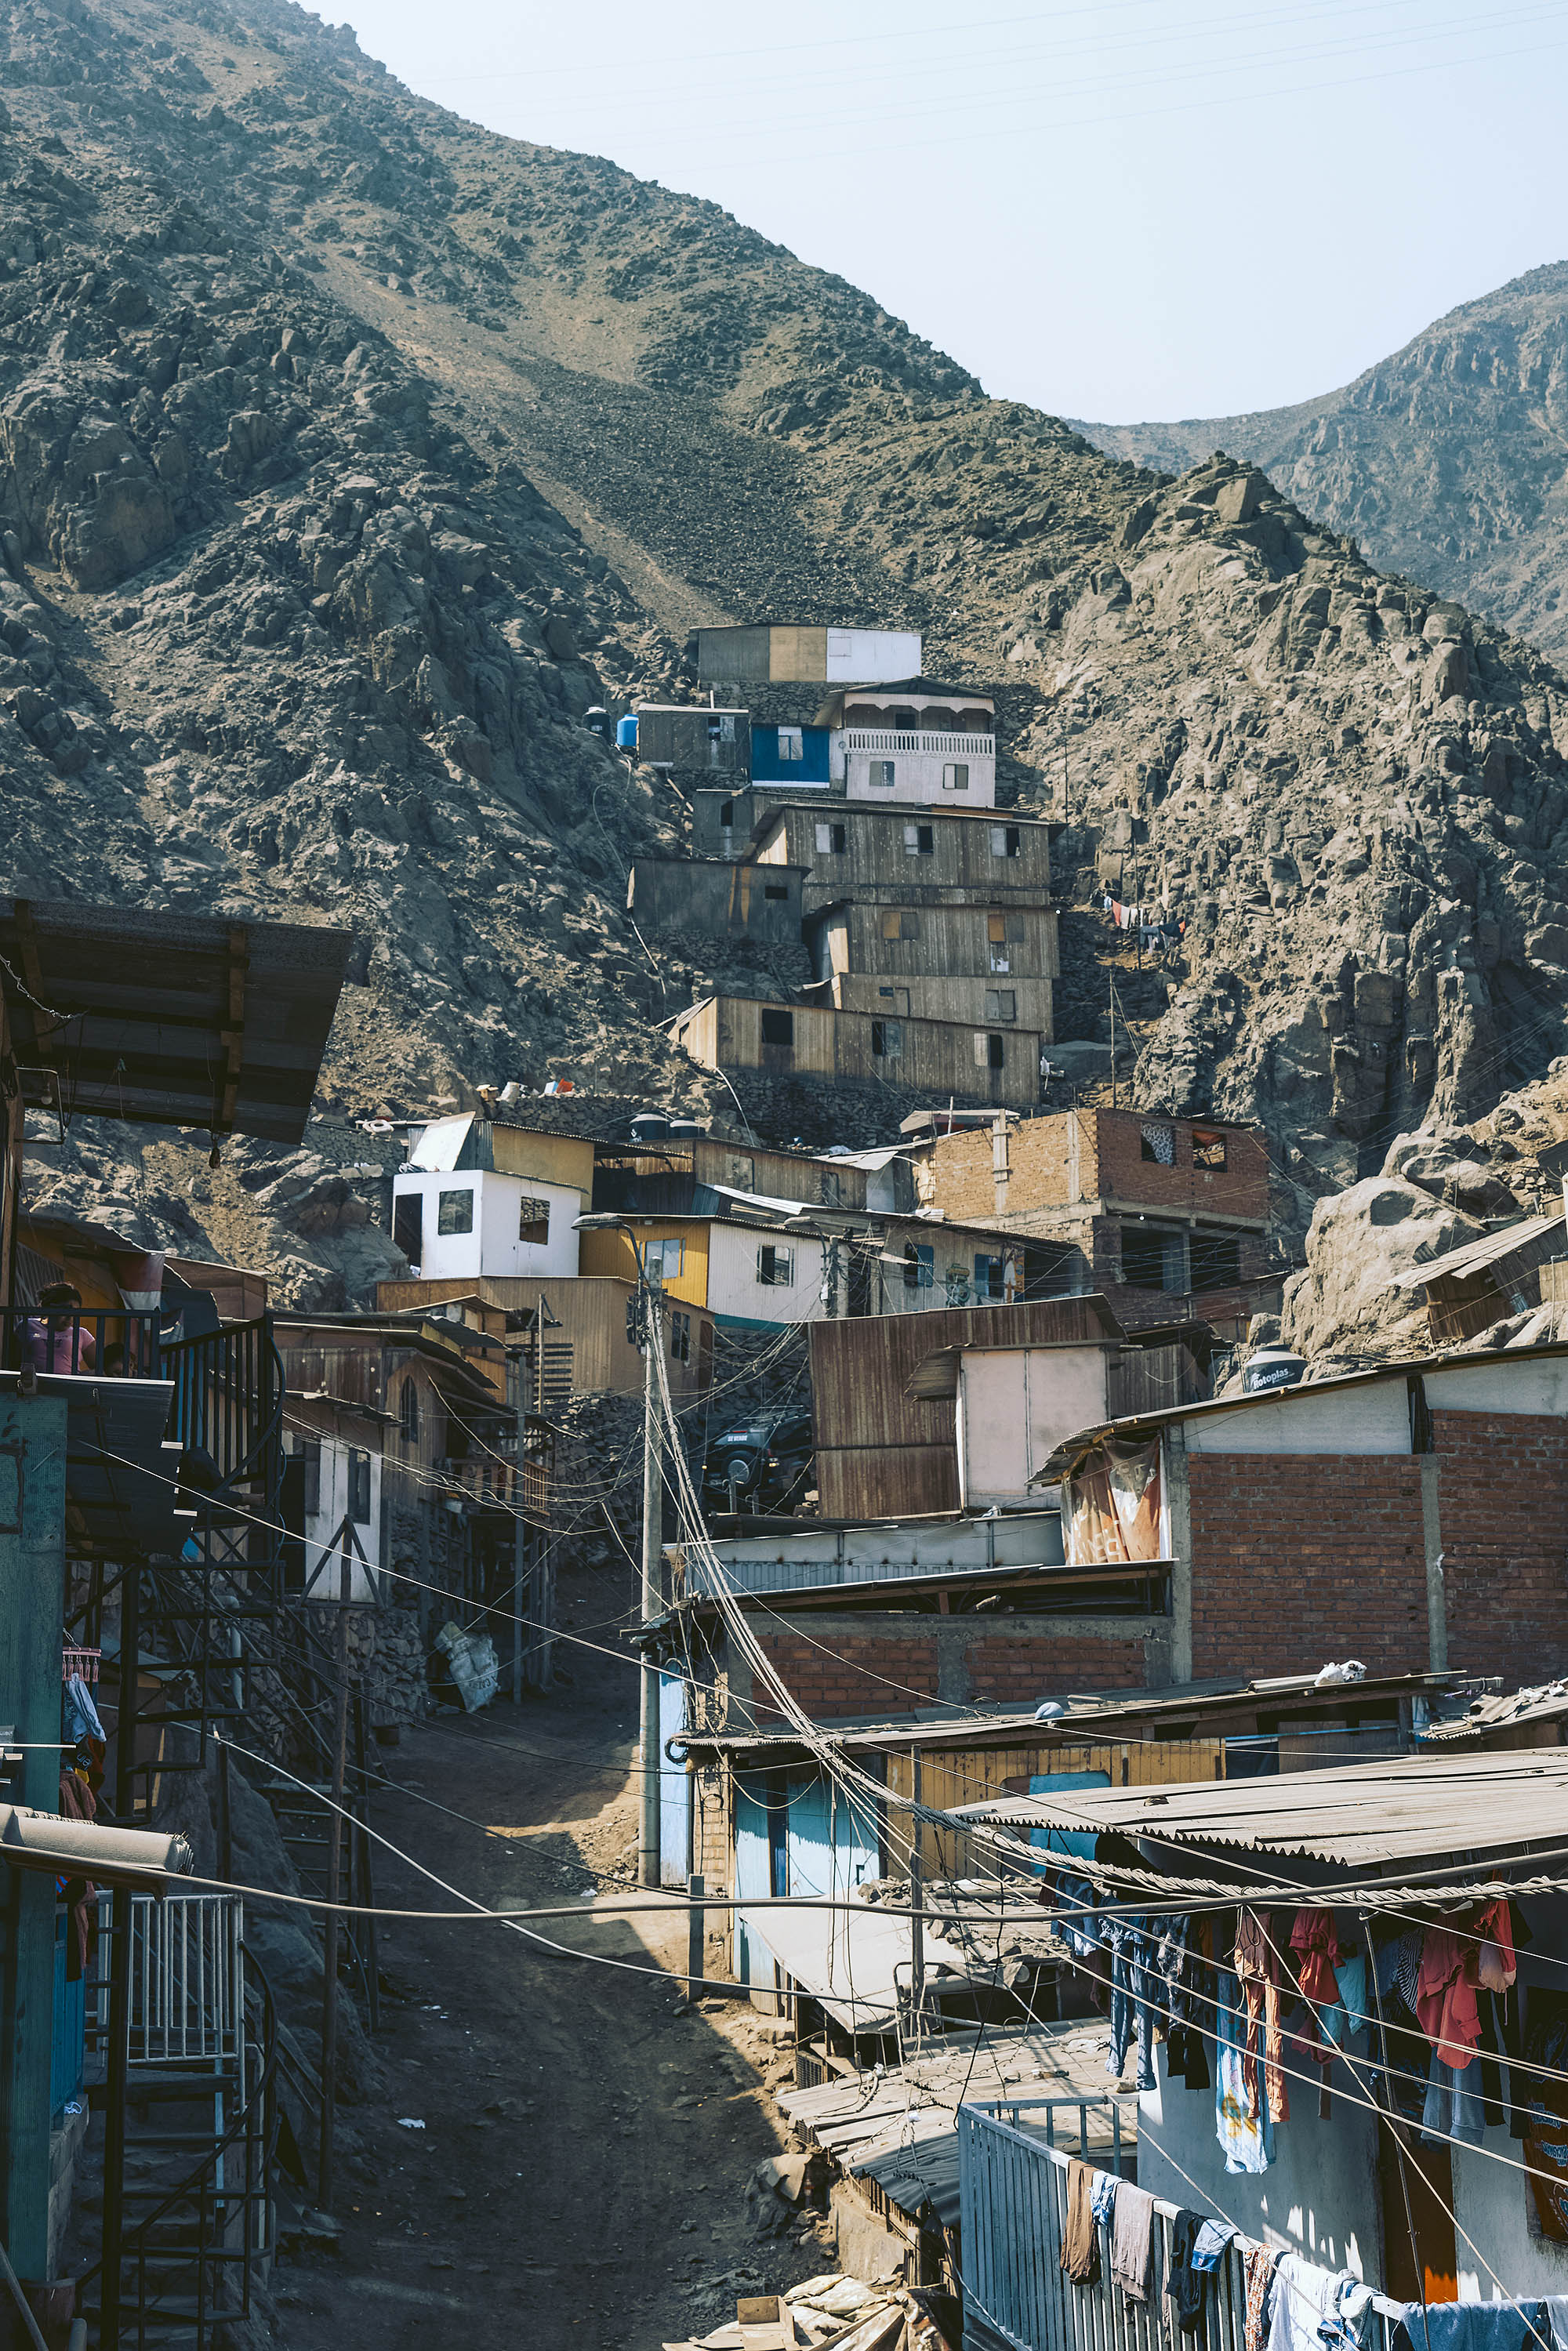 photograph of a mountain on which there are several slums lima peru